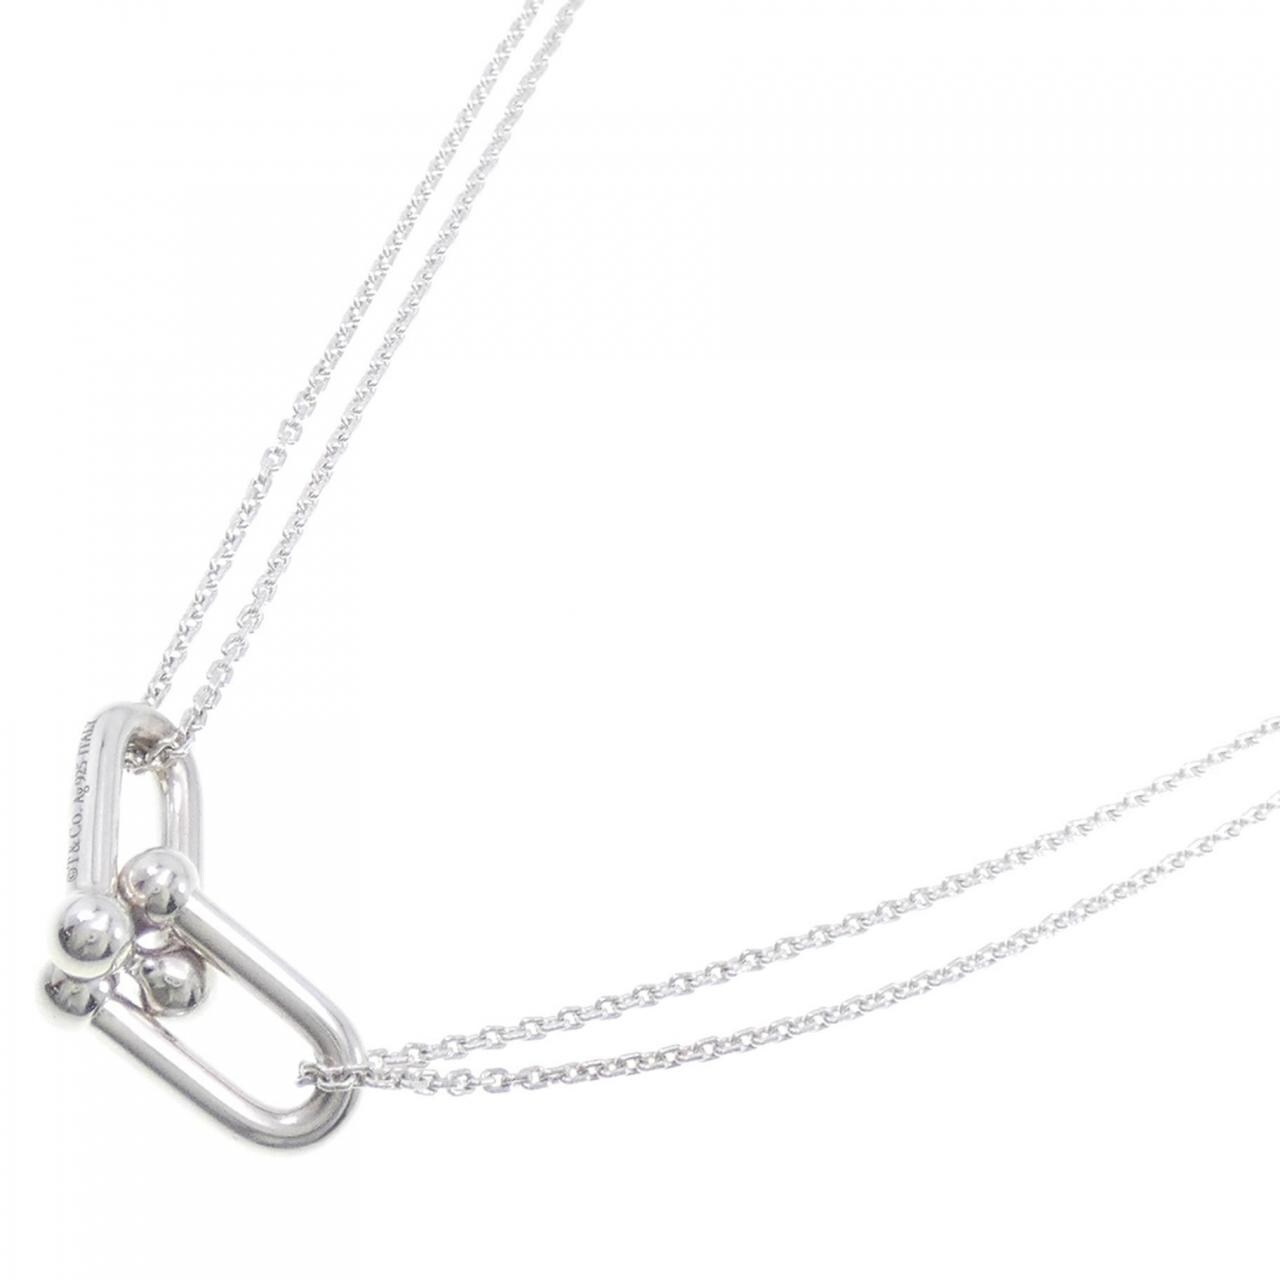 [BRAND NEW] TIFFANY Double Link Necklace